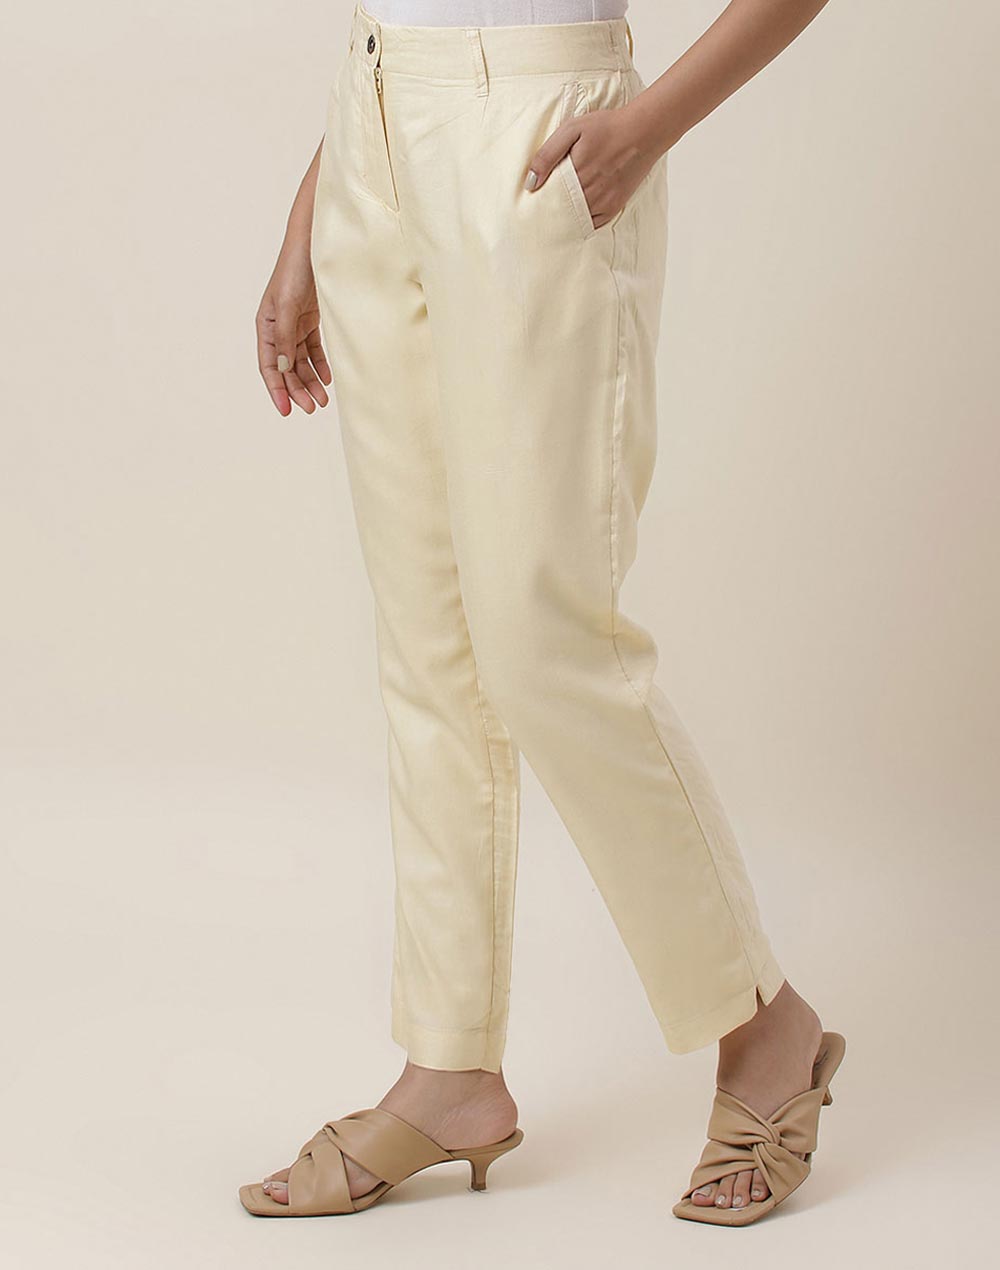 Cotton Lycra Plain Formal Casual Trouser Pant Women at Rs 425/piece in Noida